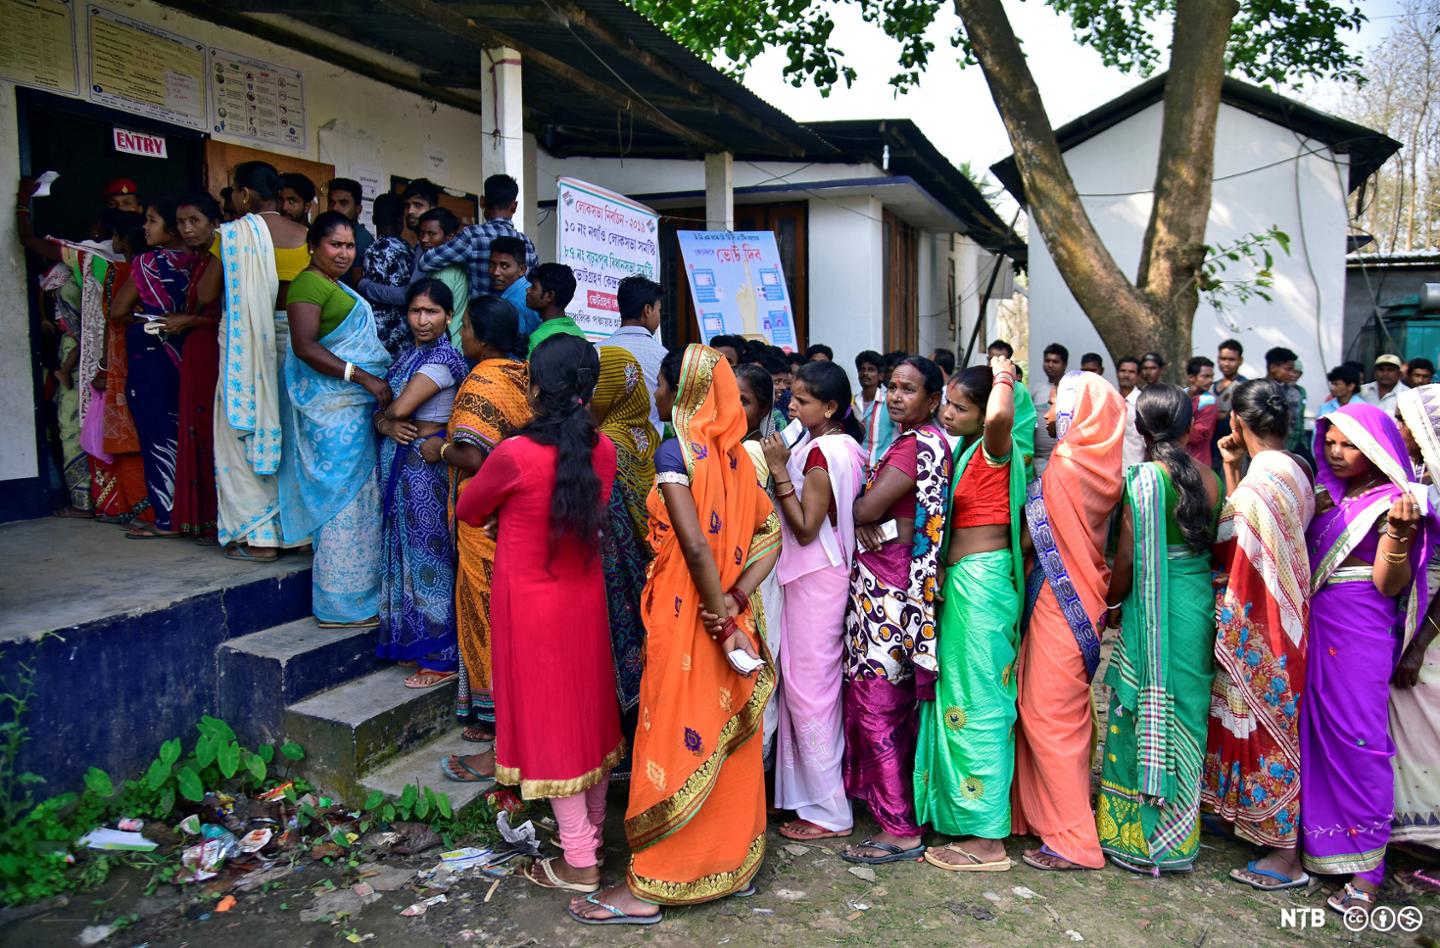 Women wait in queues to cast their votes outside a polling station during the 2019 Indian general election. Photographer: Anuwar Hazarika, NTB